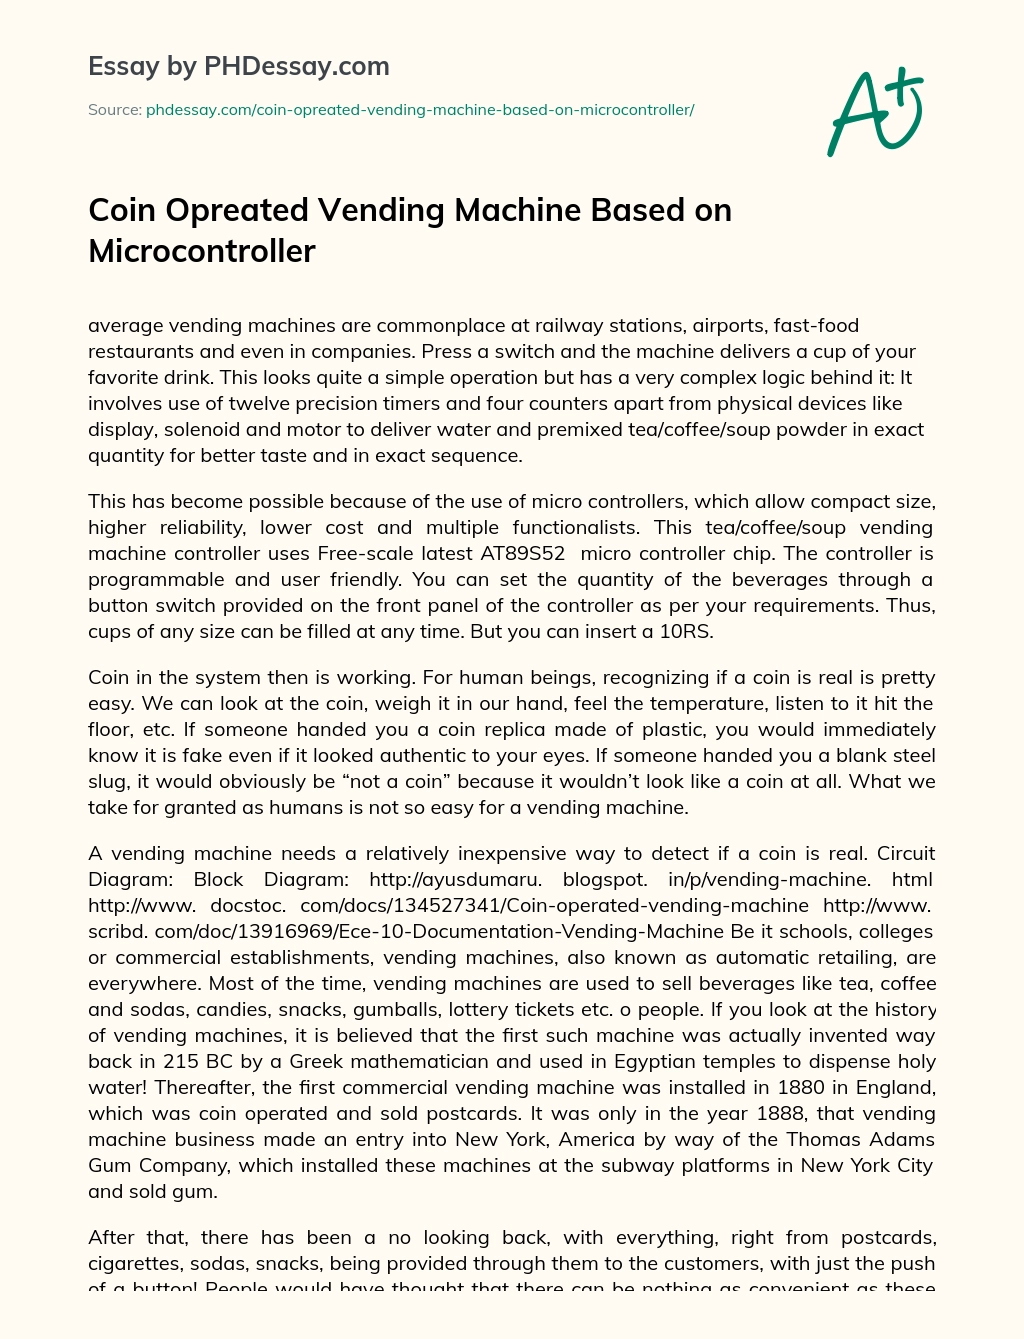 Coin Opreated Vending Machine Based on Microcontroller essay